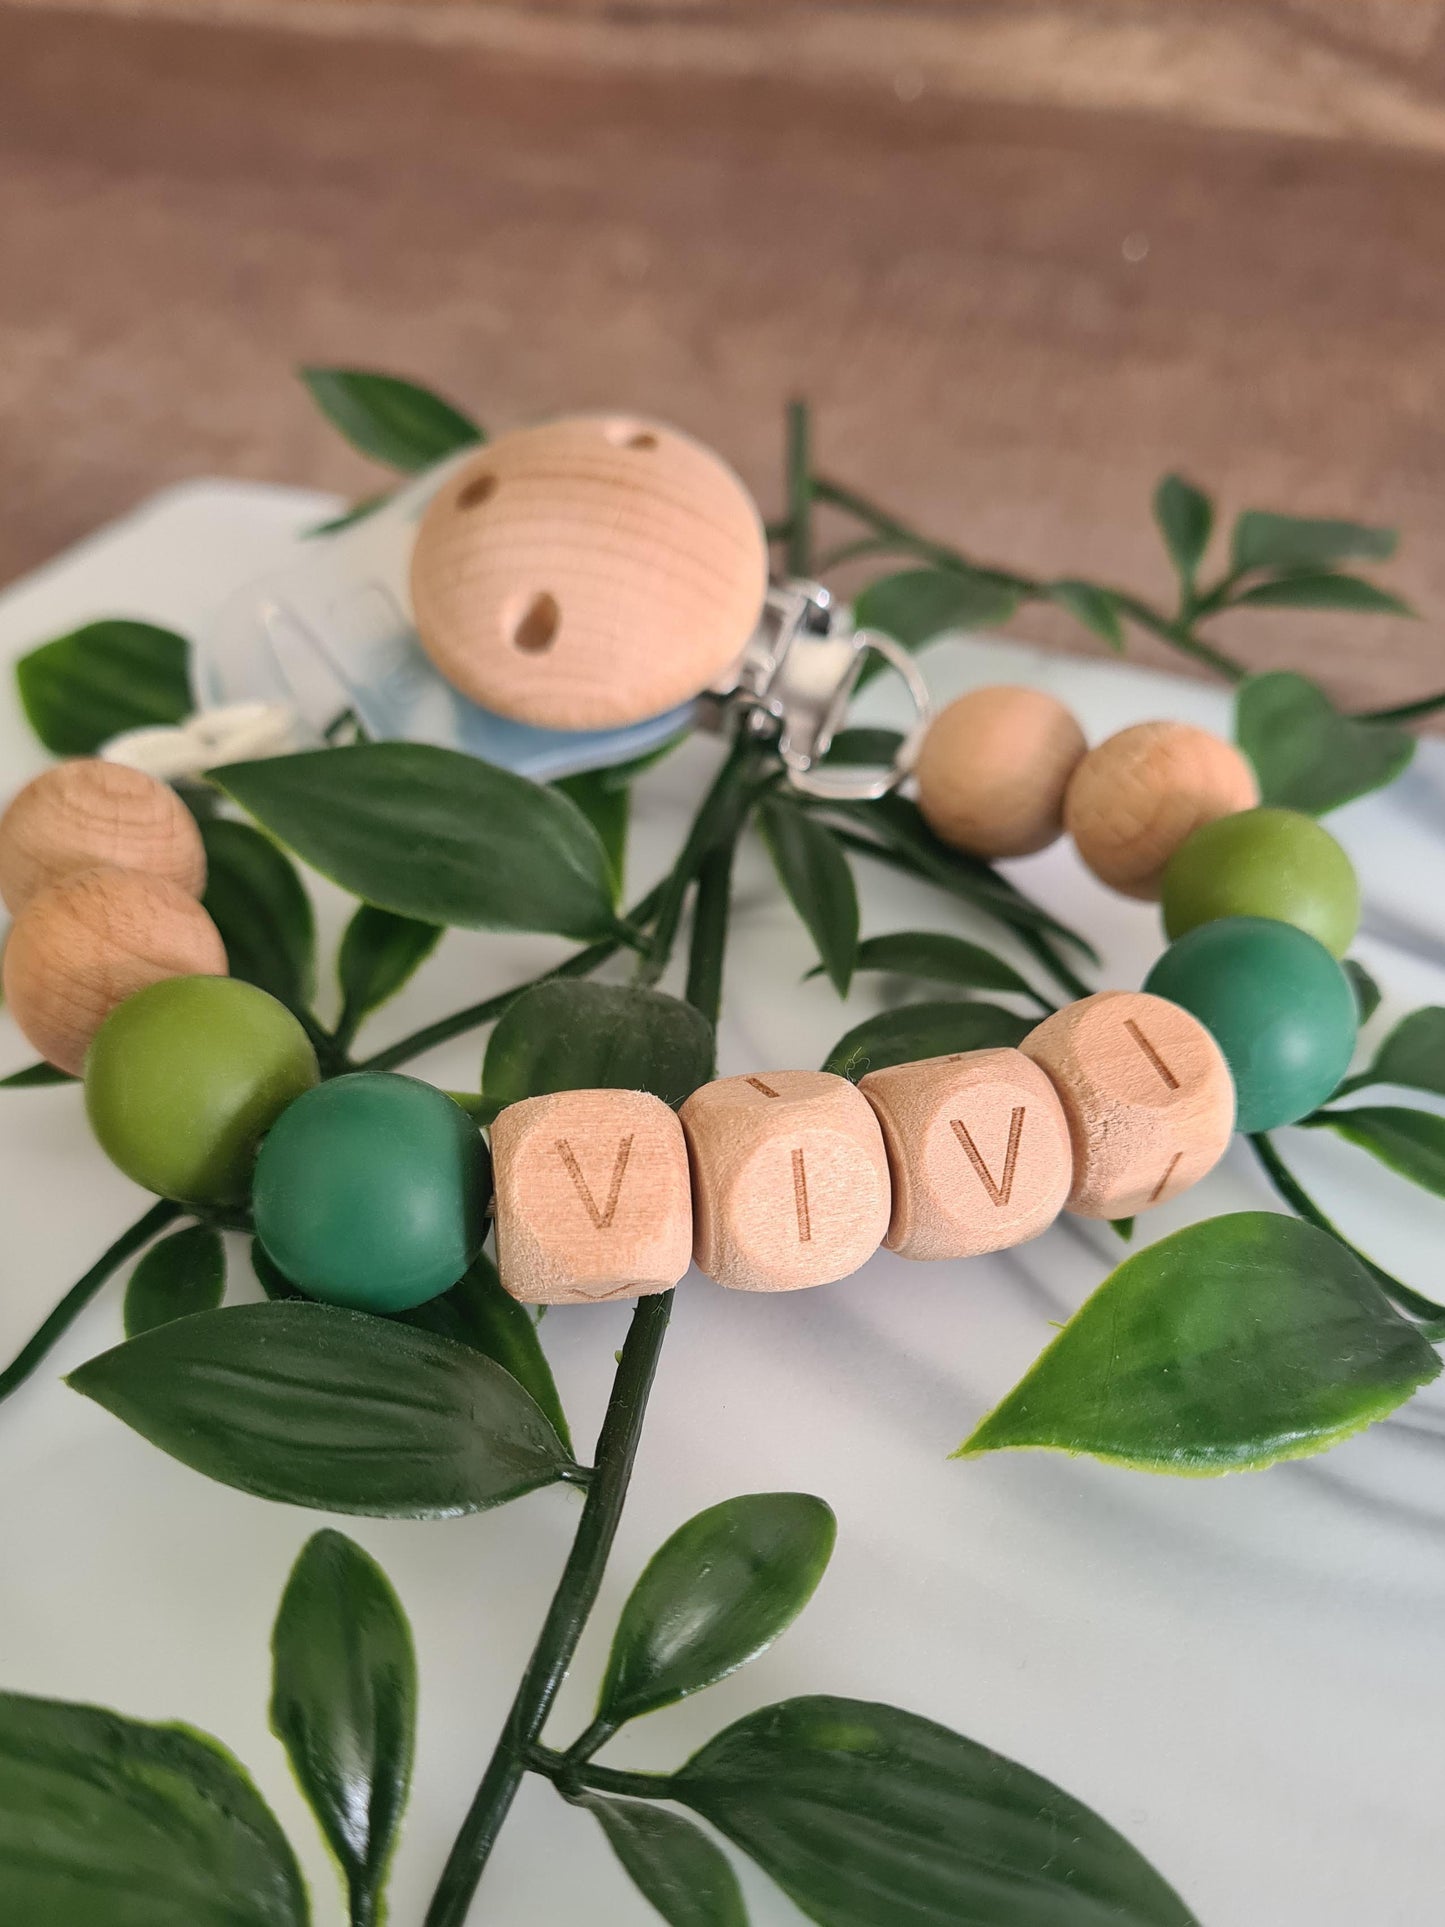 Personalised custom made soother clip. Add your Childs name to their dummy clip. Unique gift ideas for newborns and toddlers. Handcrafted Irish made.